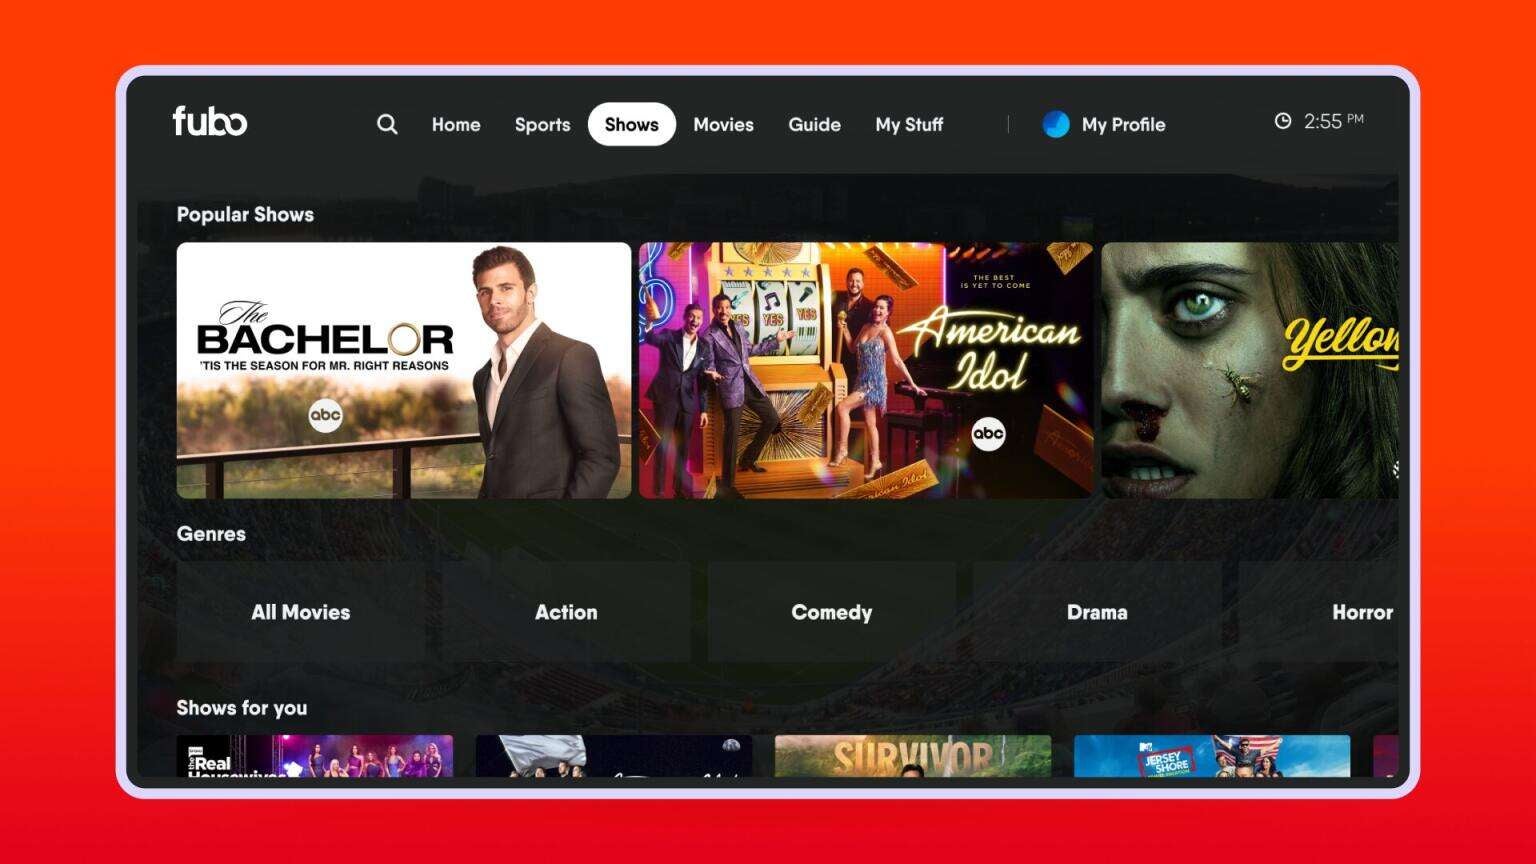 What is Different Now that fuboTV Has Changed Its Name to Fubo?